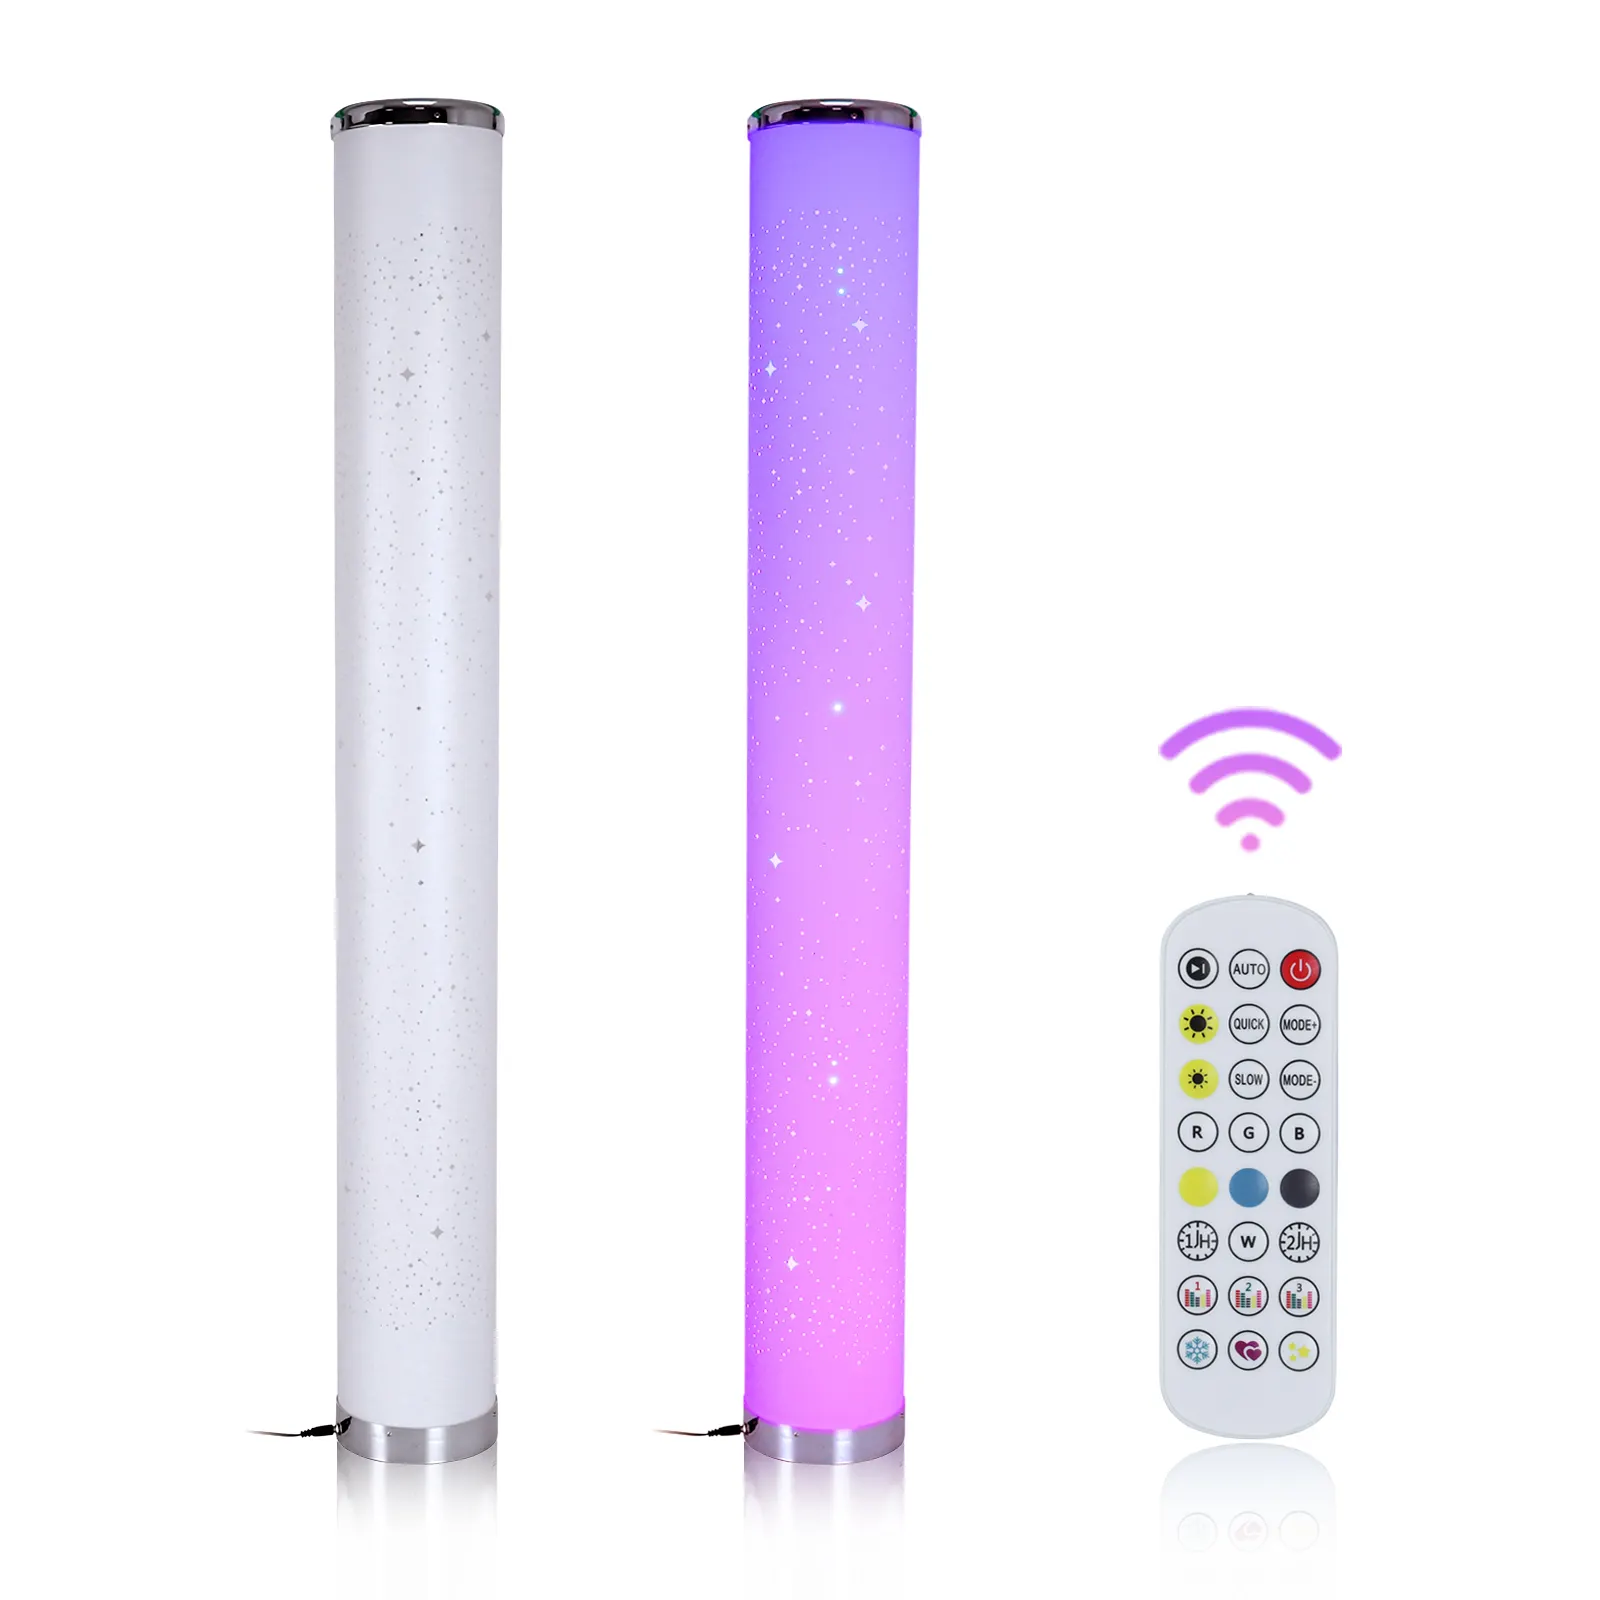 LED luminous cylindrical standing lamp remote control colorful charging RGB atmosphere LED bedroom corner ambient light